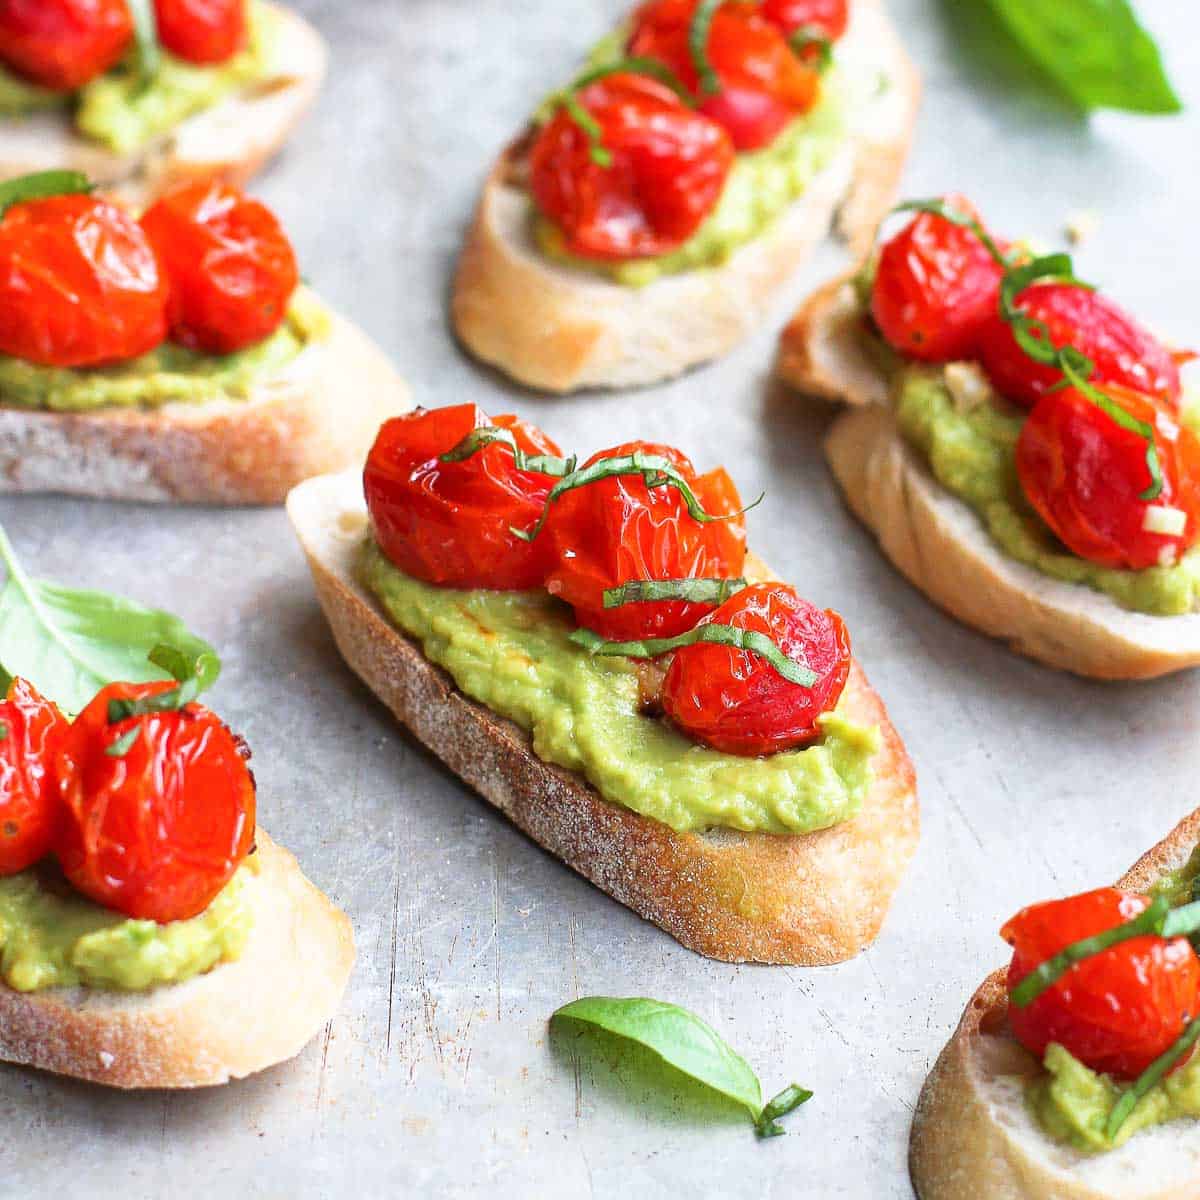 Baguette slices topped with smashed avocado and roasted tomatoes.